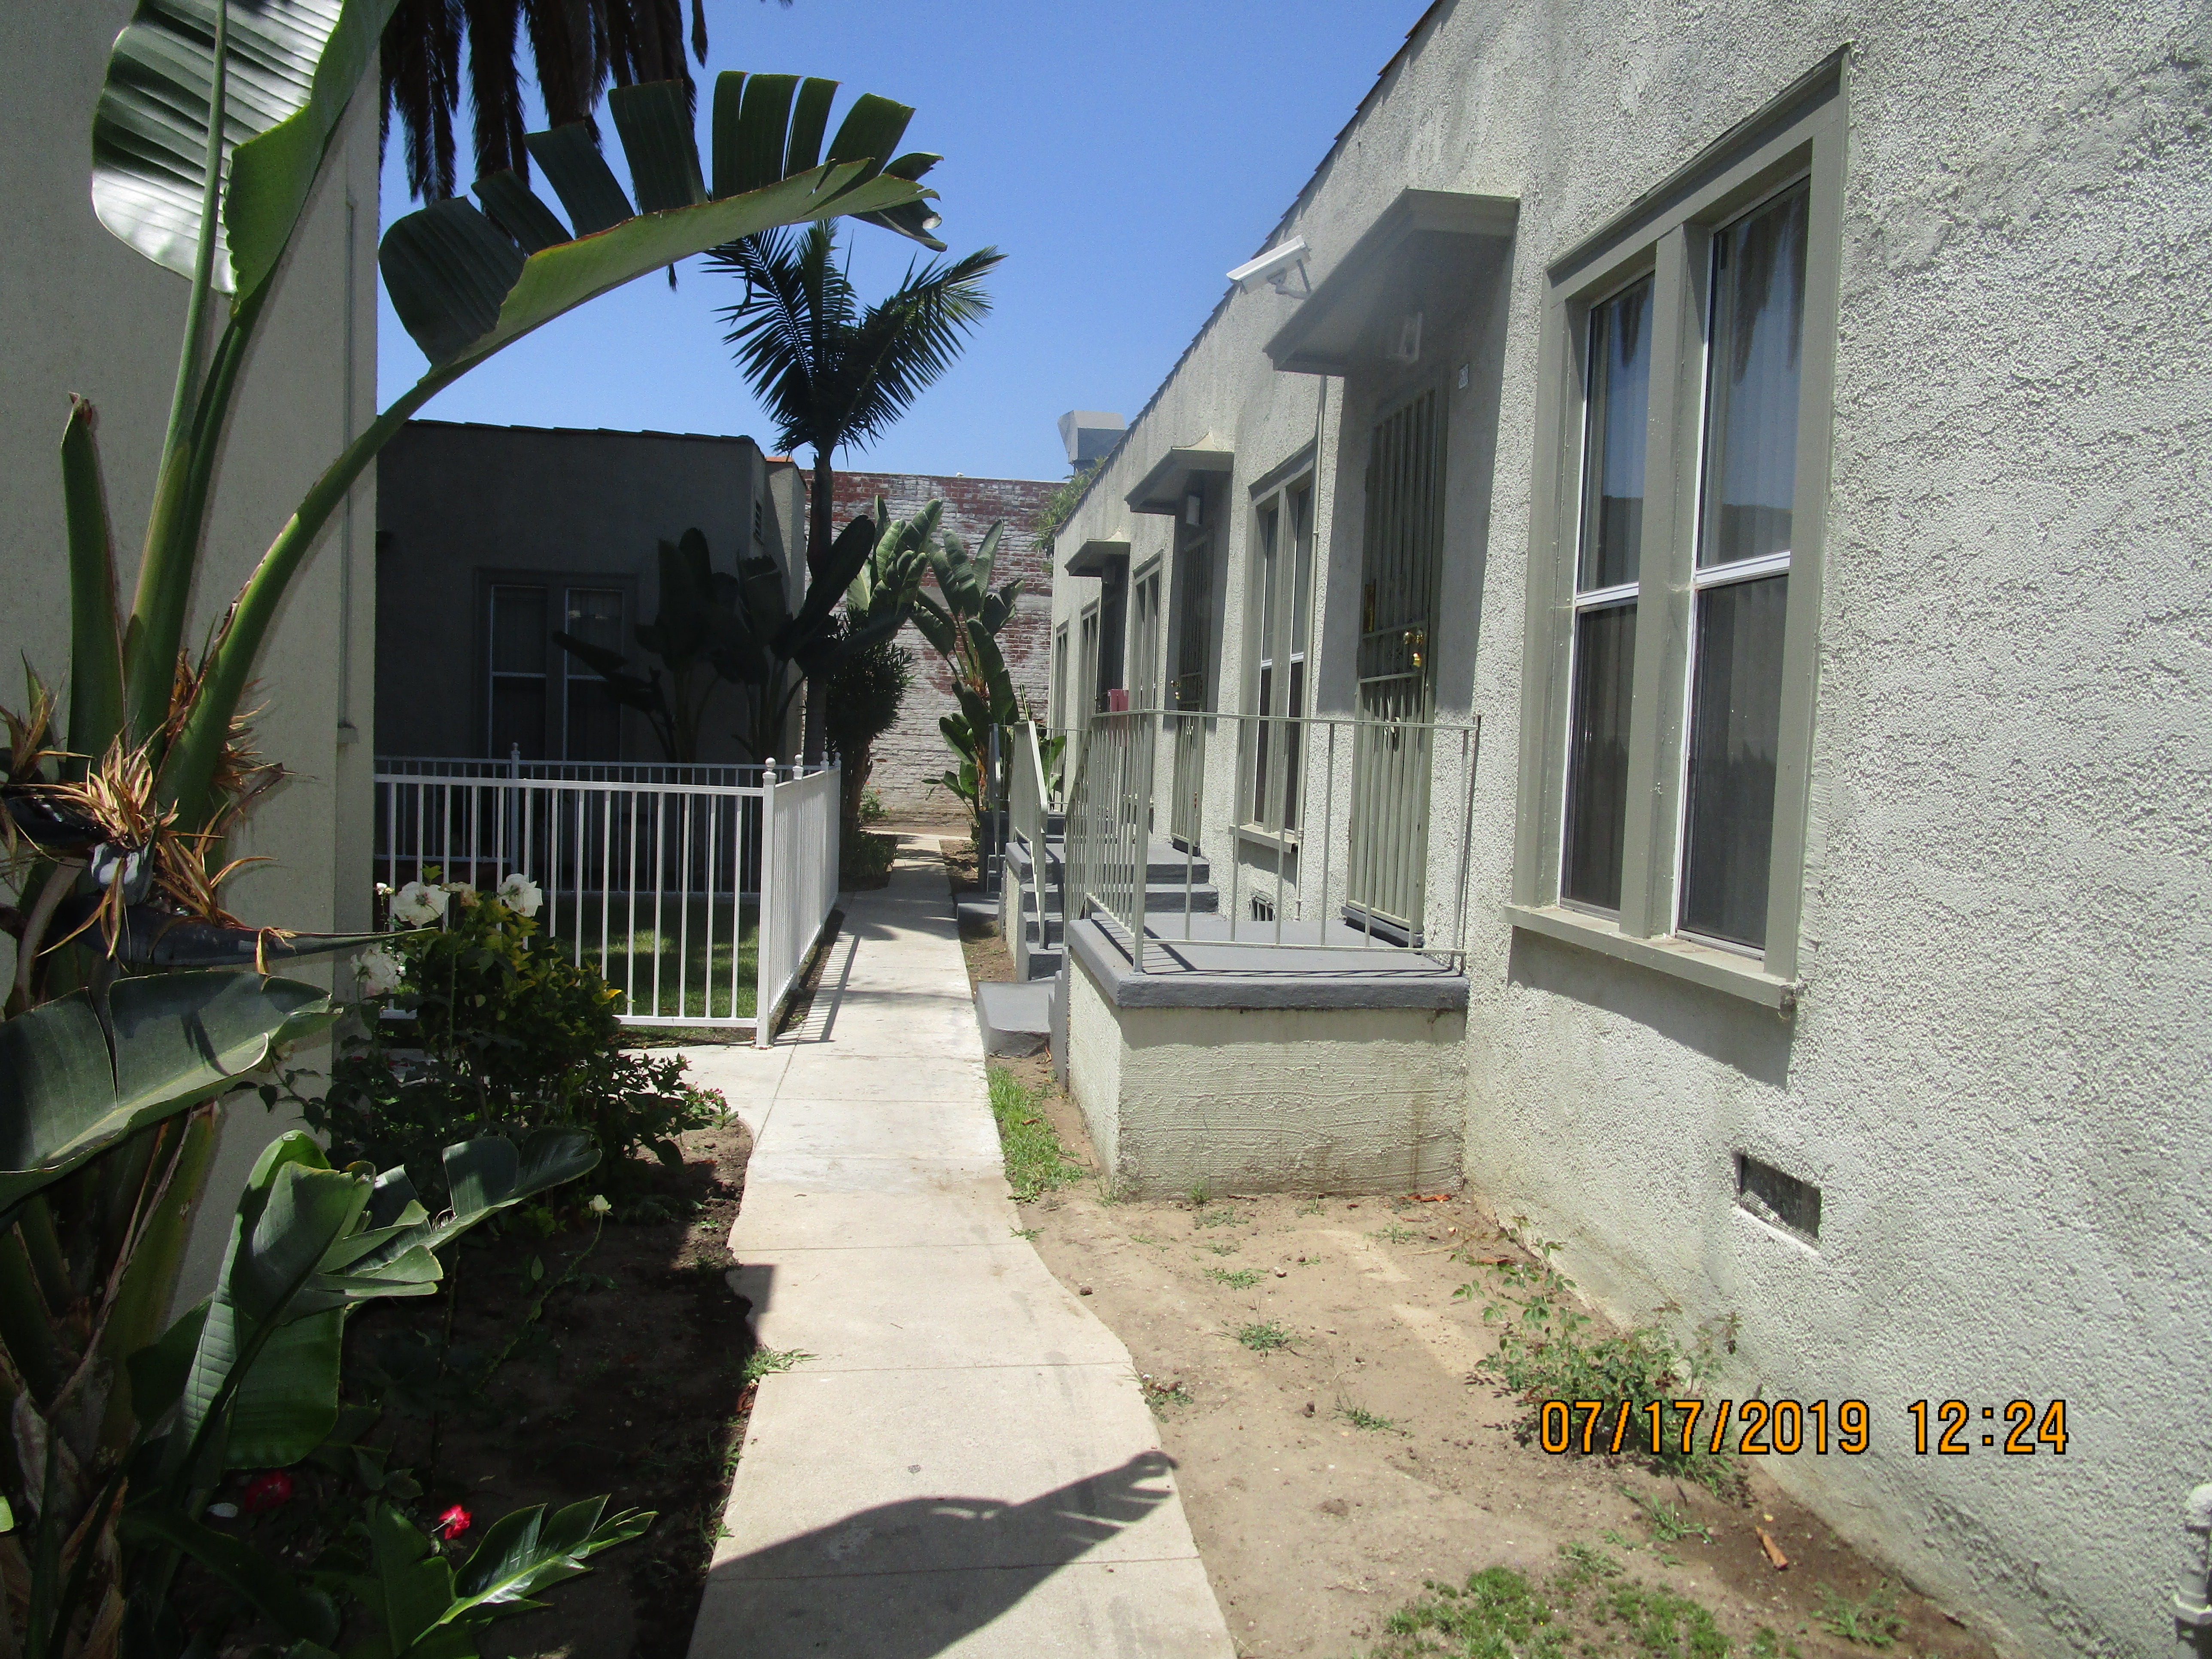 View of pathway in between units on property